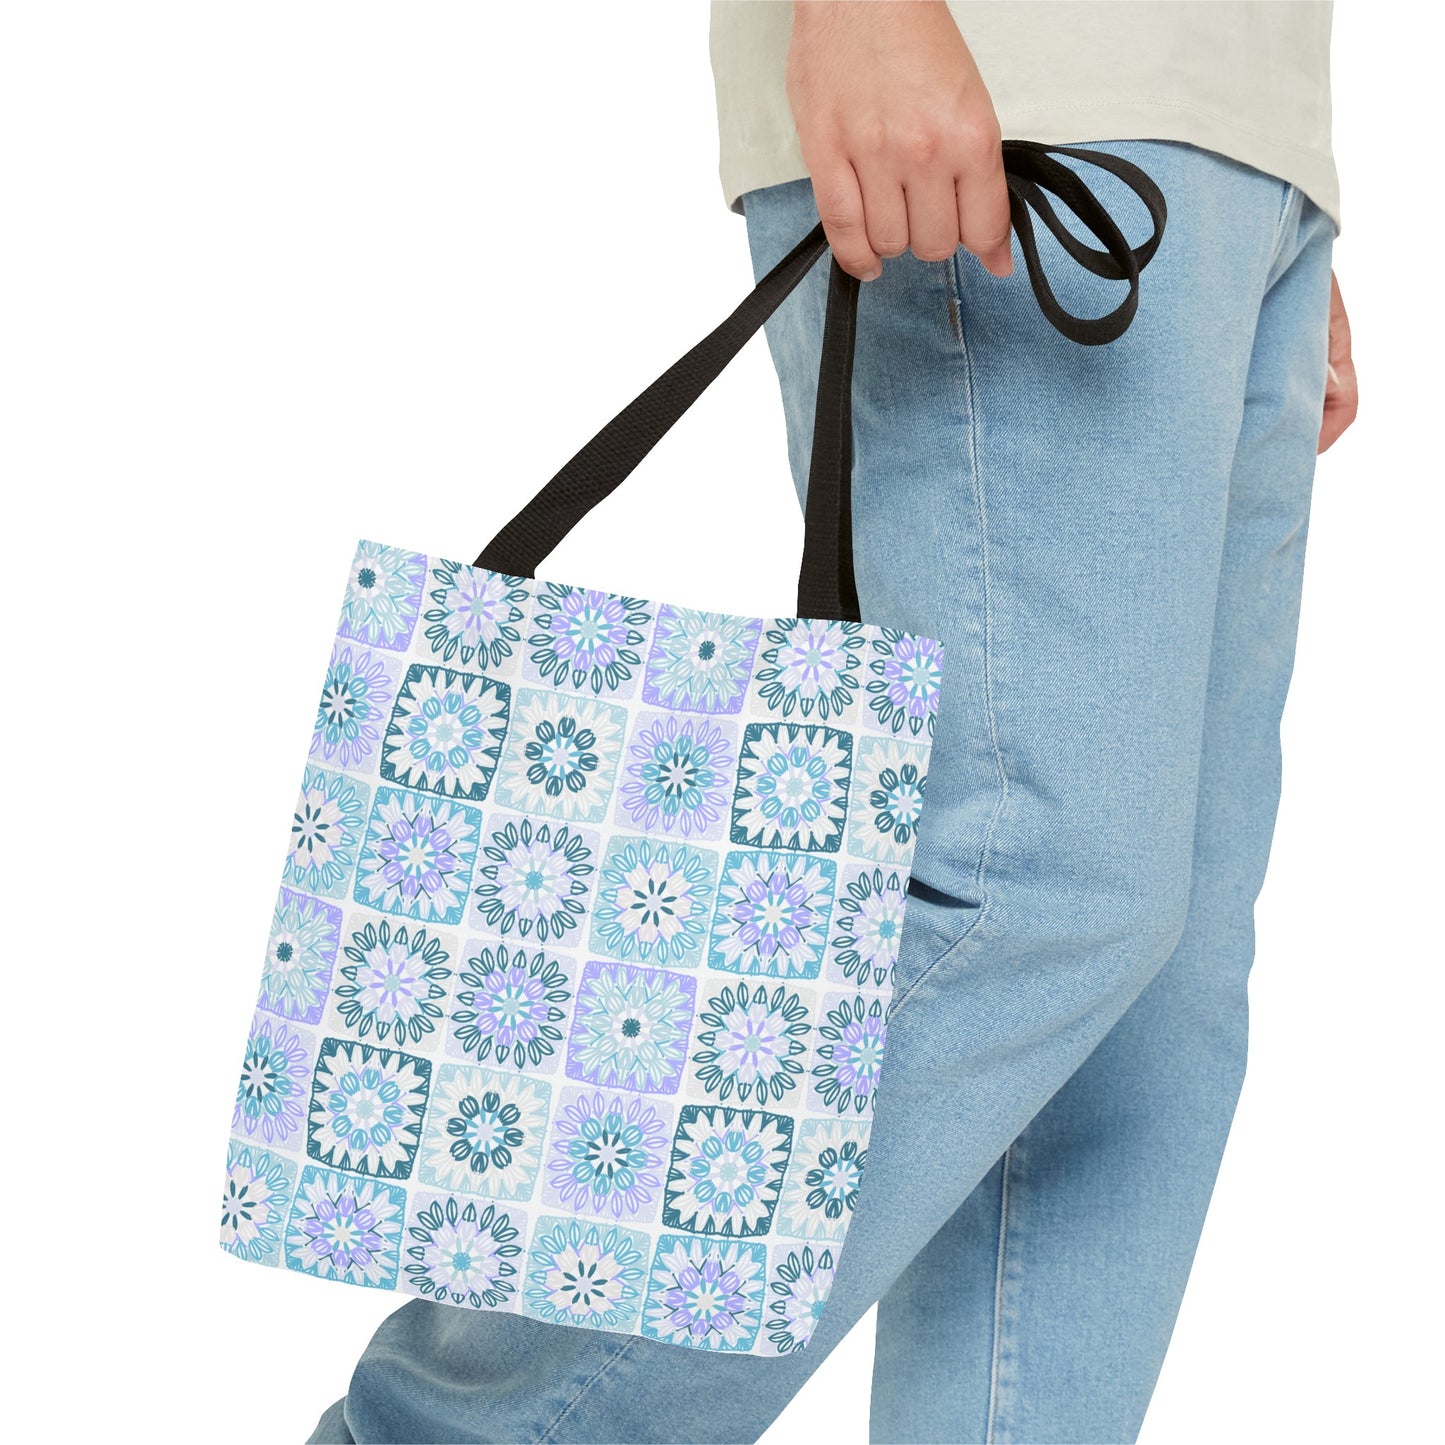 Granny Square in Blueberry Milk | Tote Bag | Crochet | Yarn | Knit | Craft